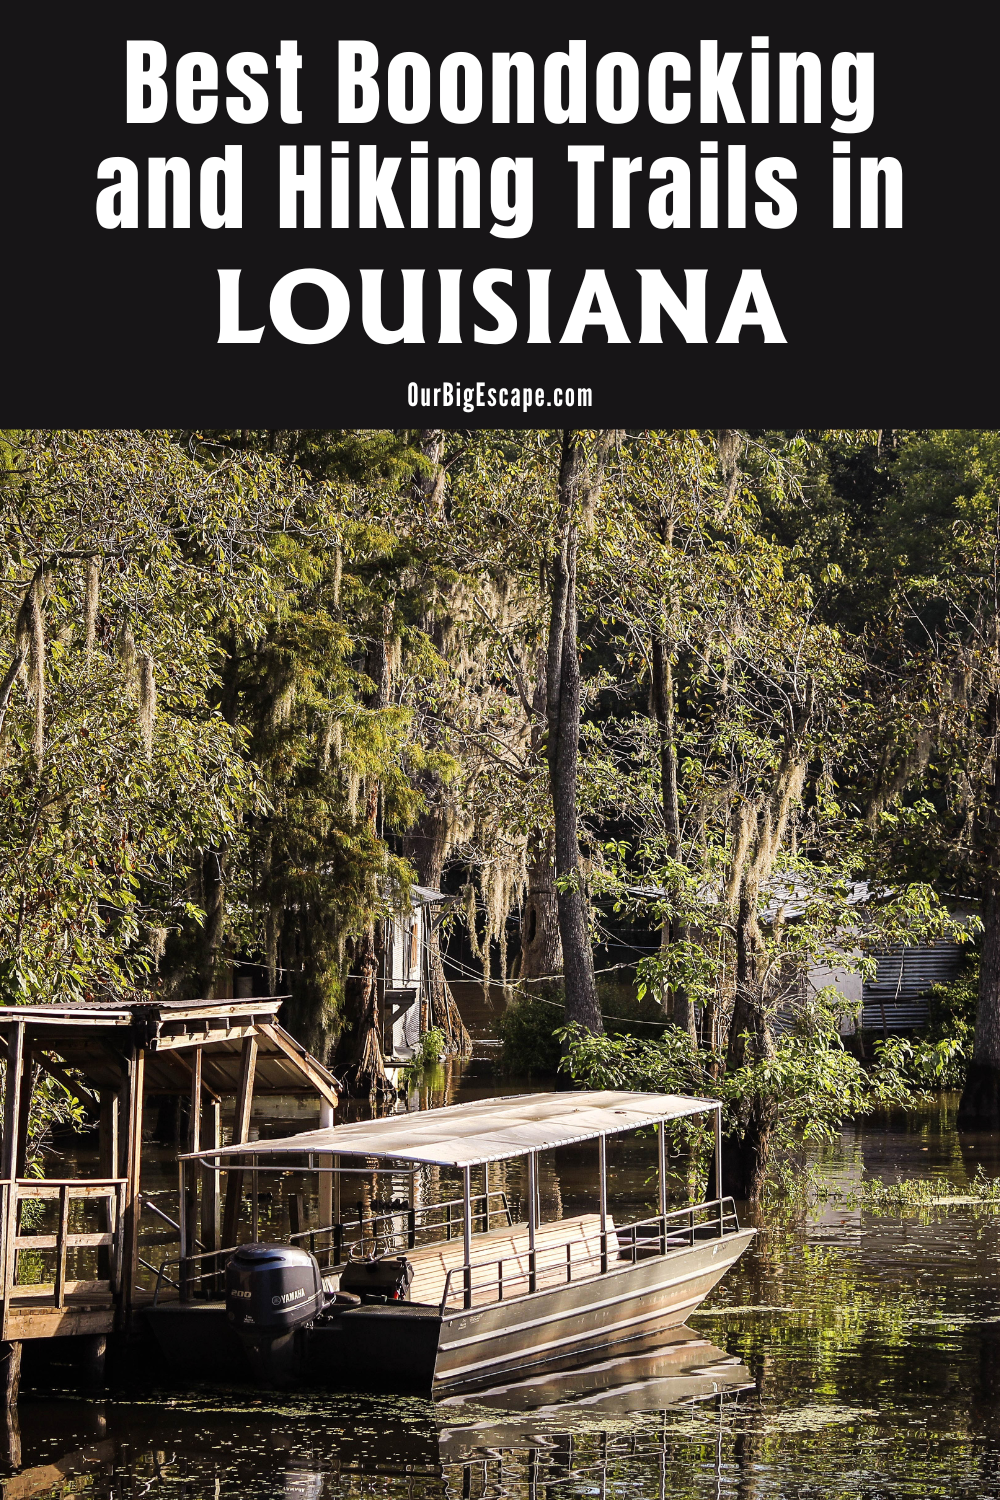 Best Boondocking and Hiking Trails in Louisiana